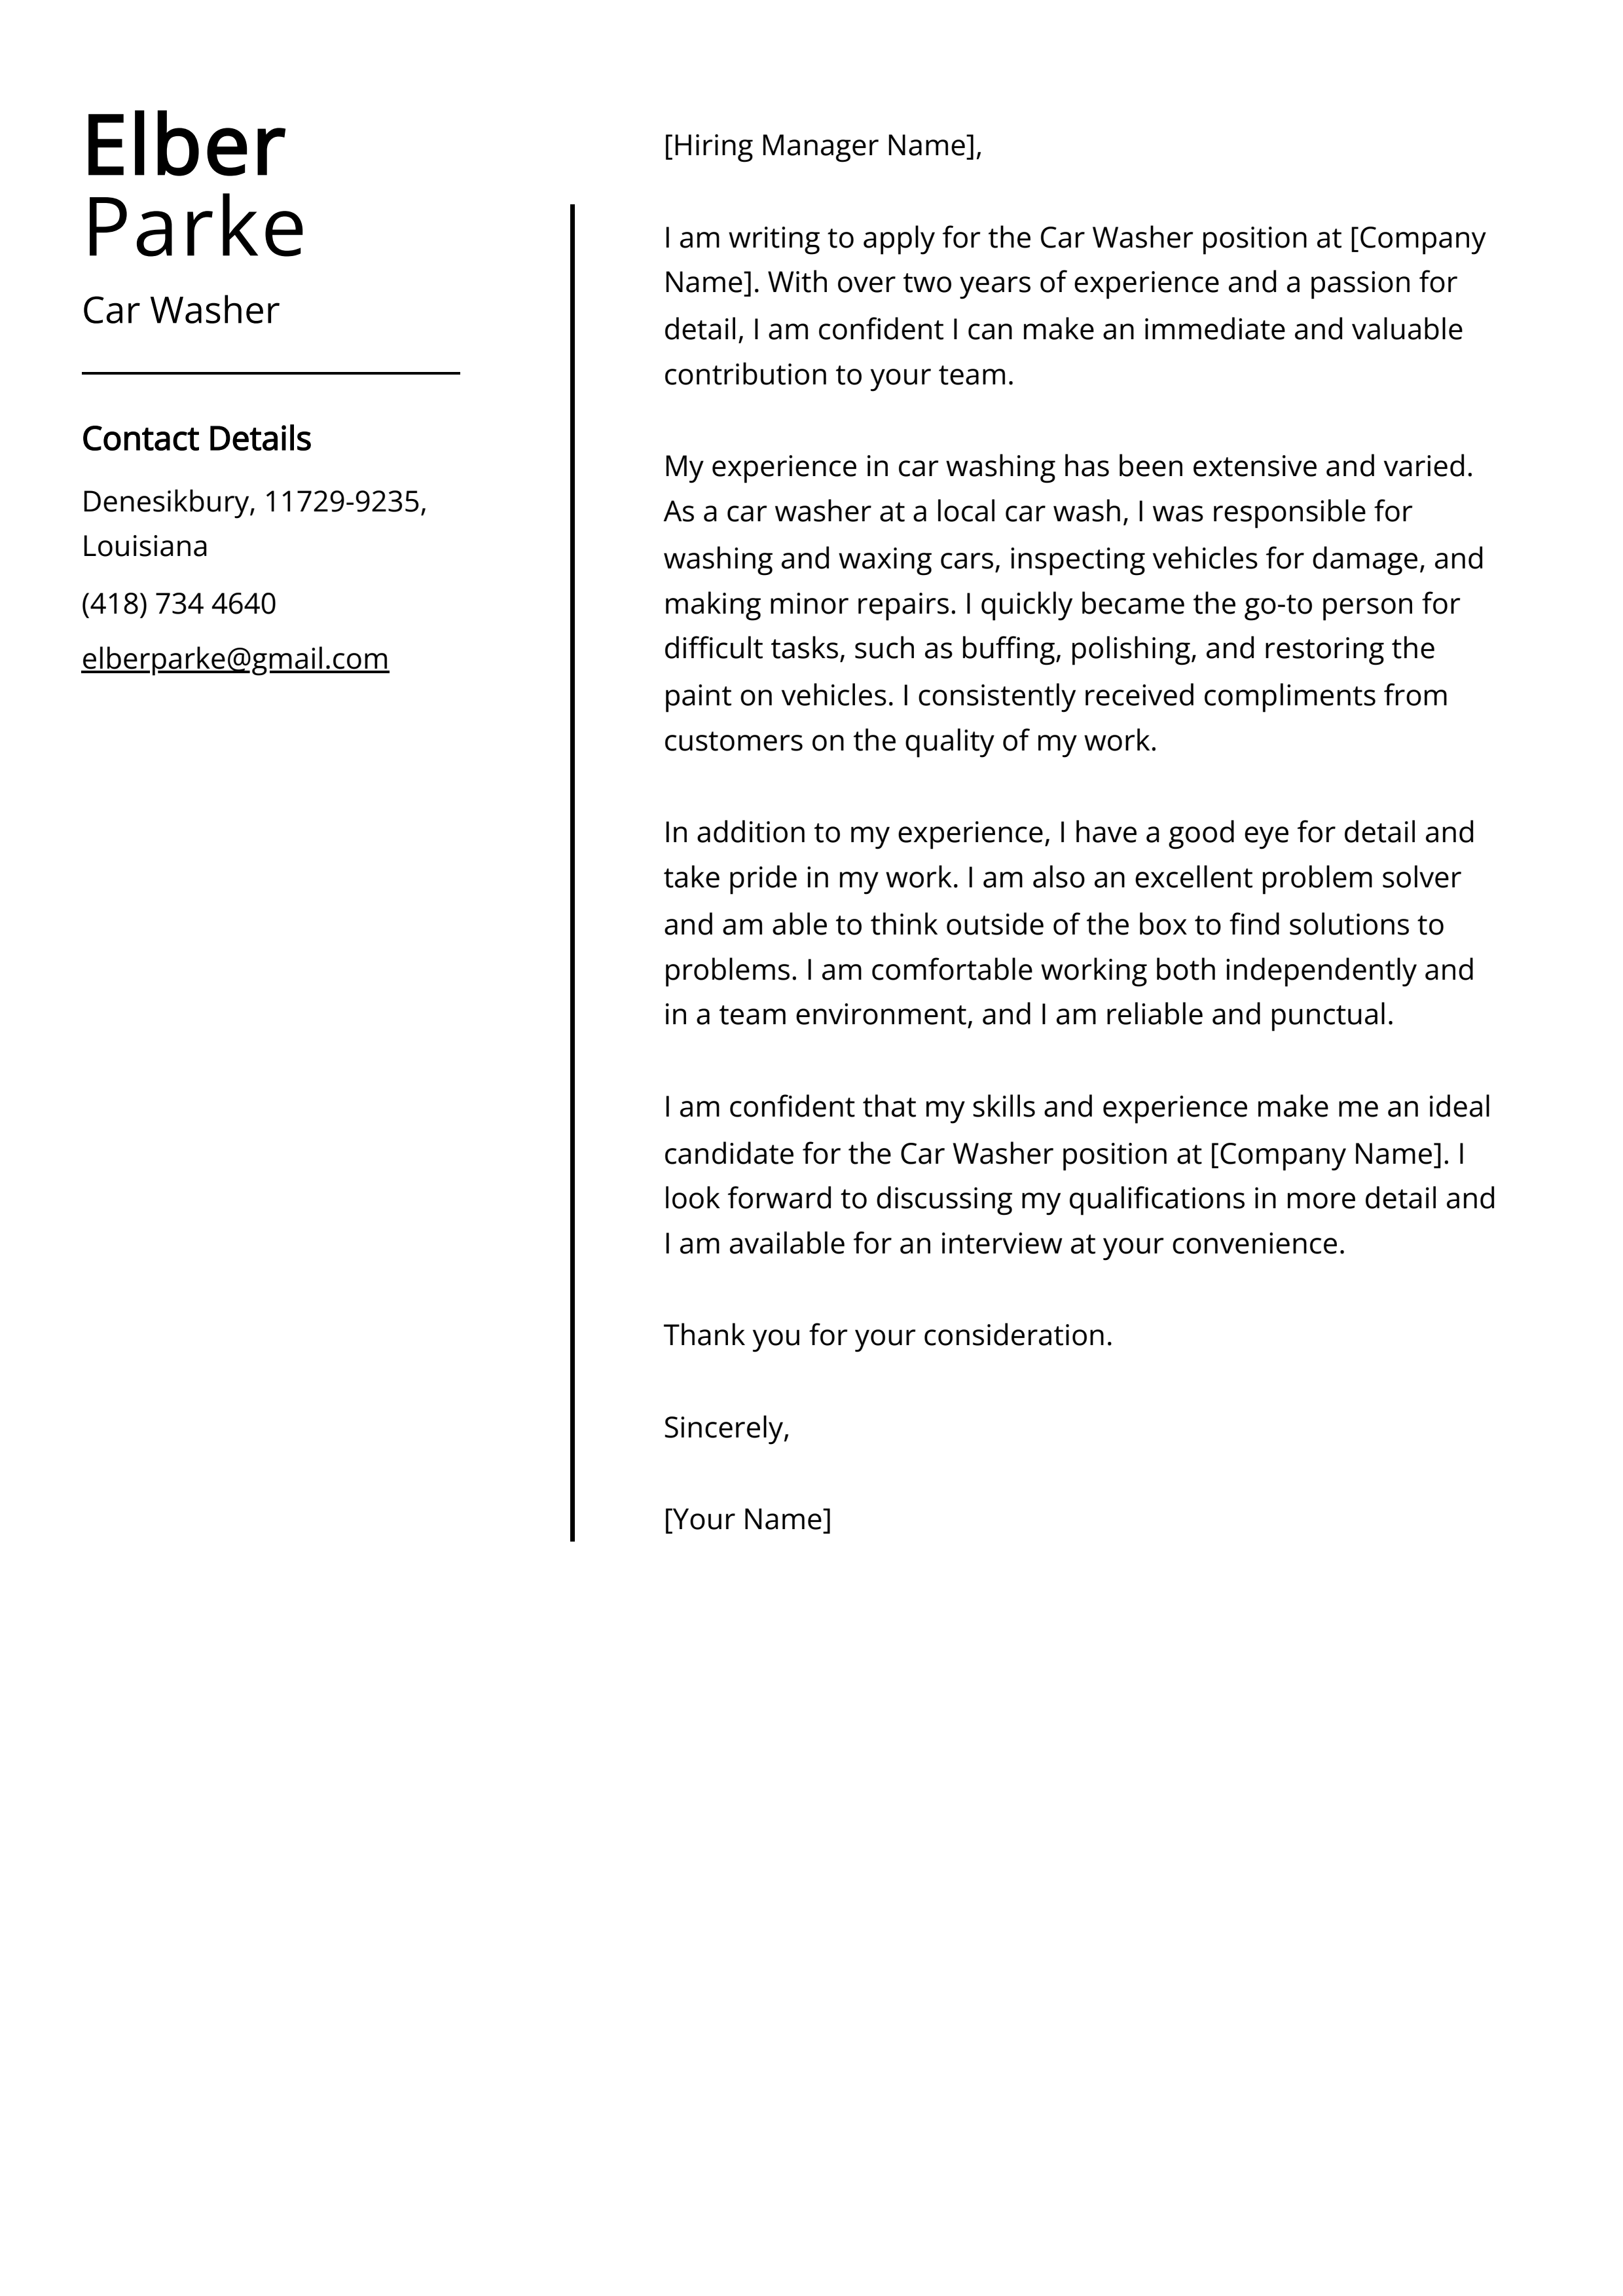 Car Washer Cover Letter Example